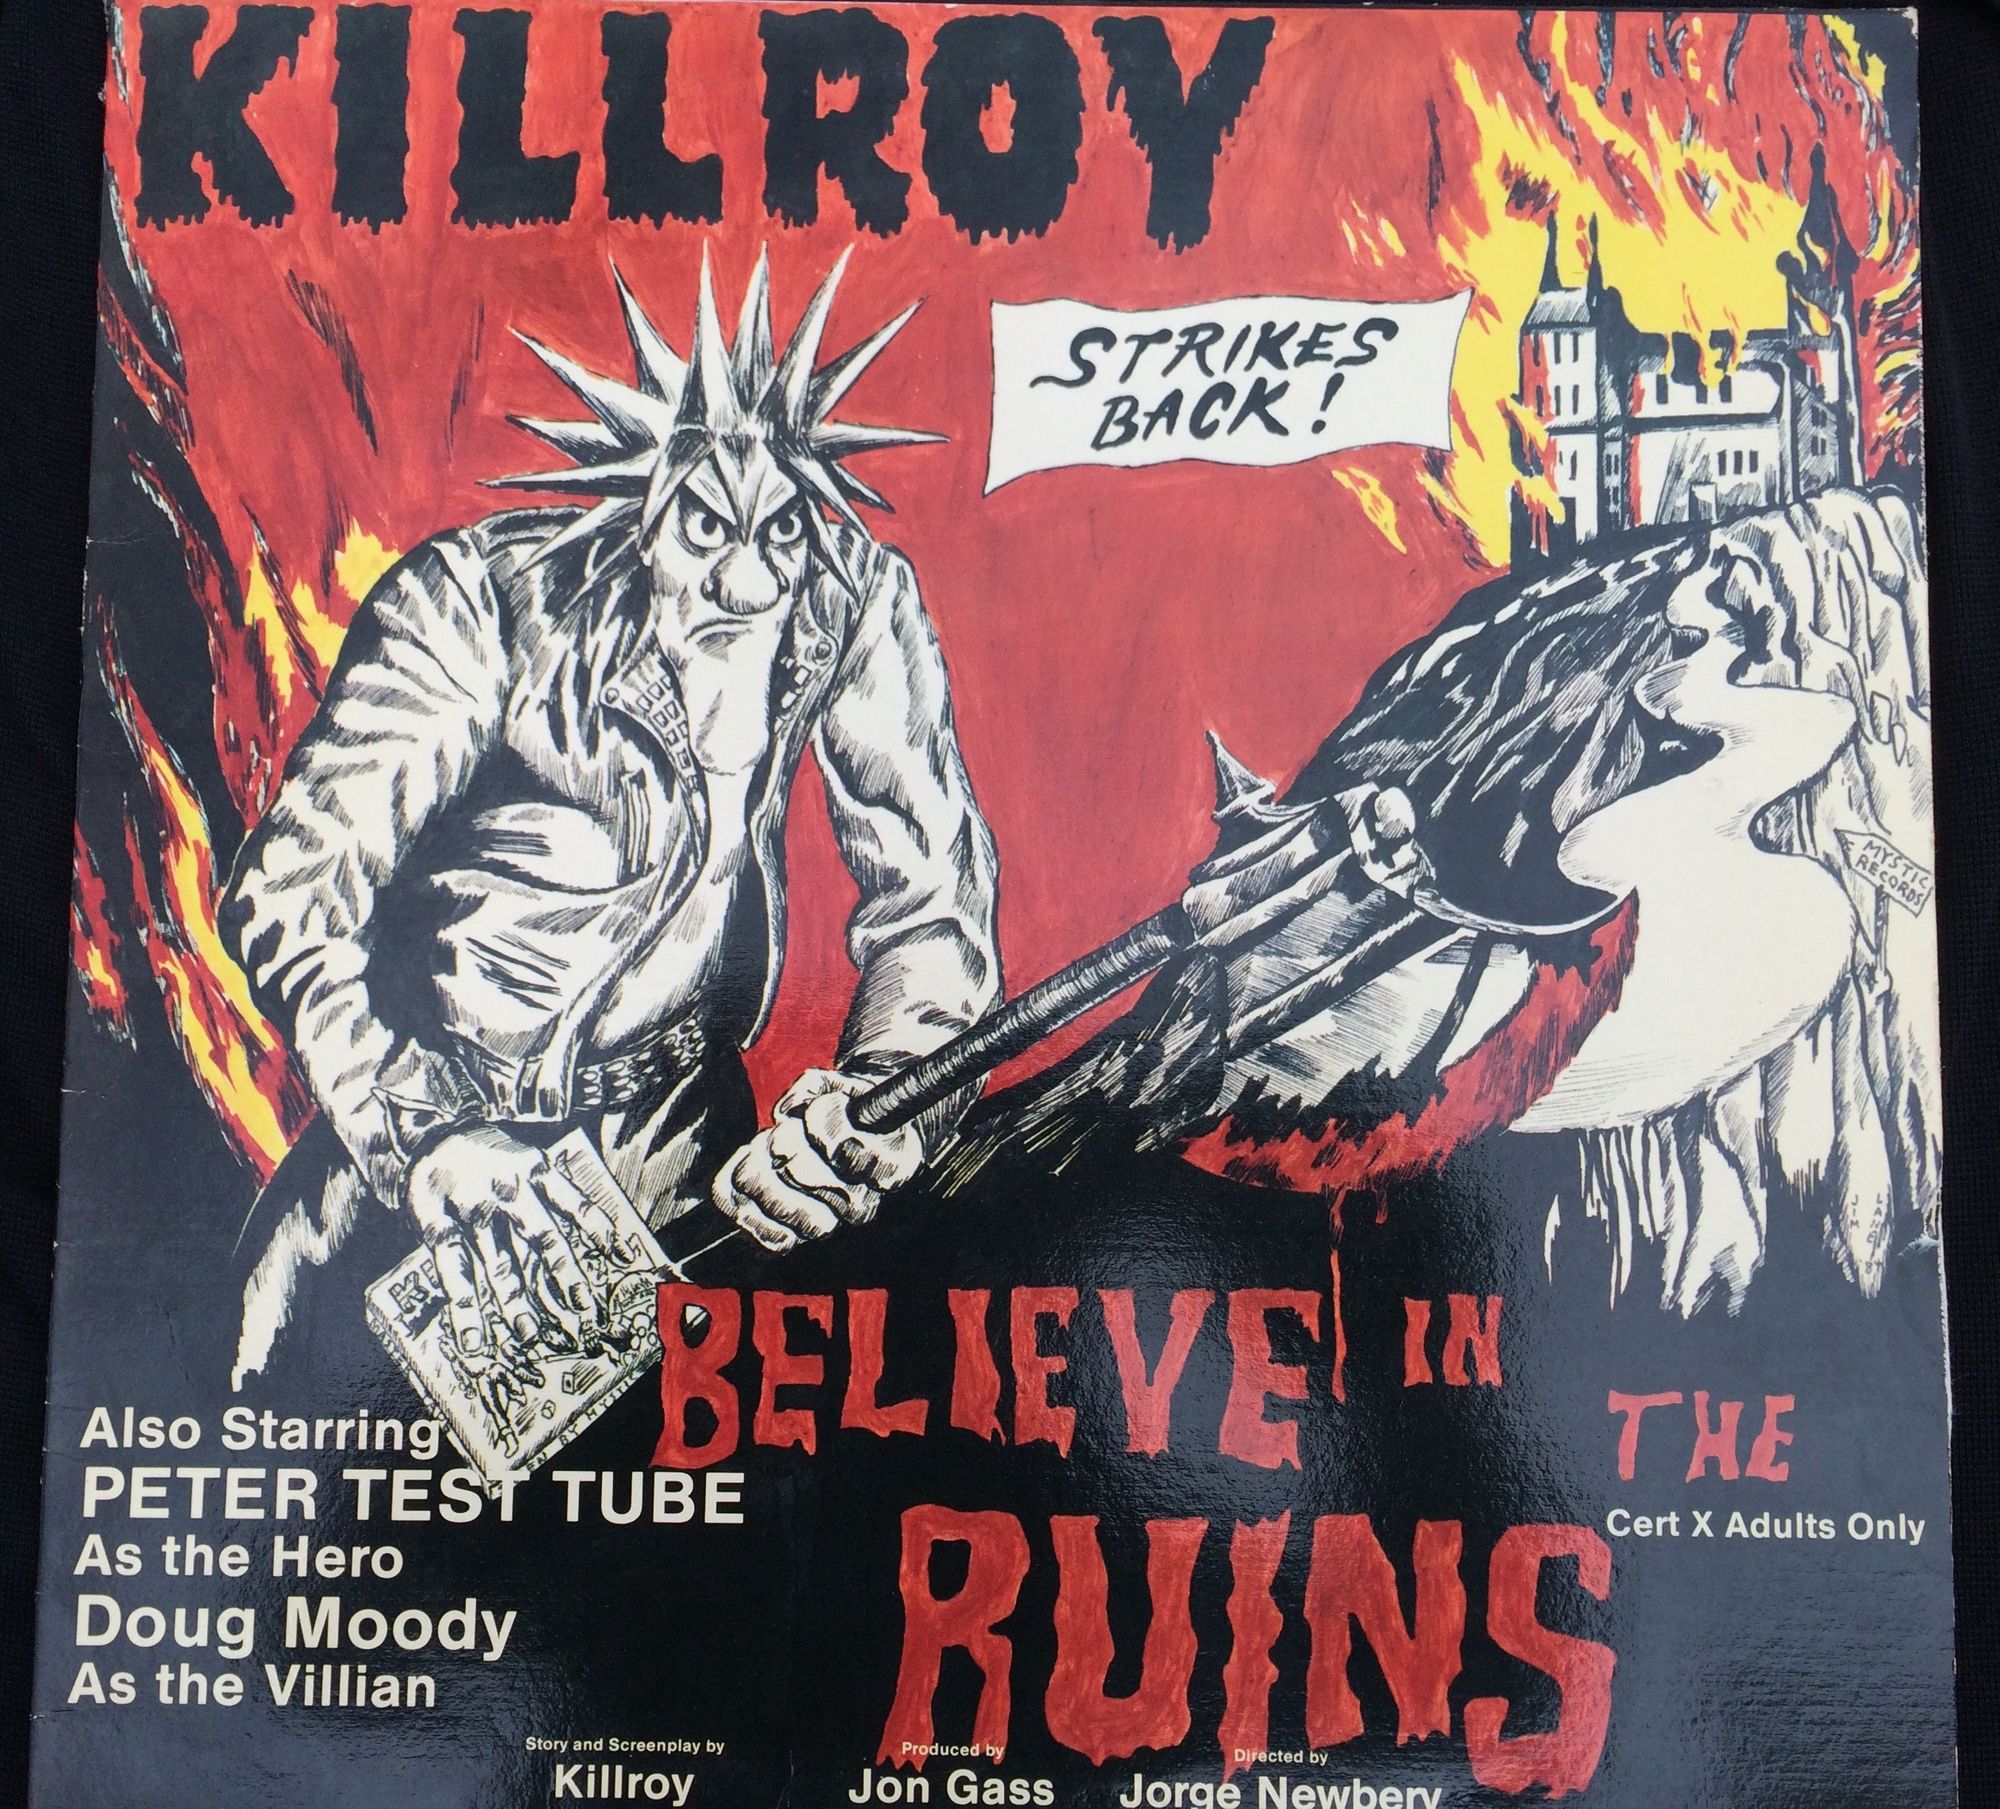 Killroy revisited